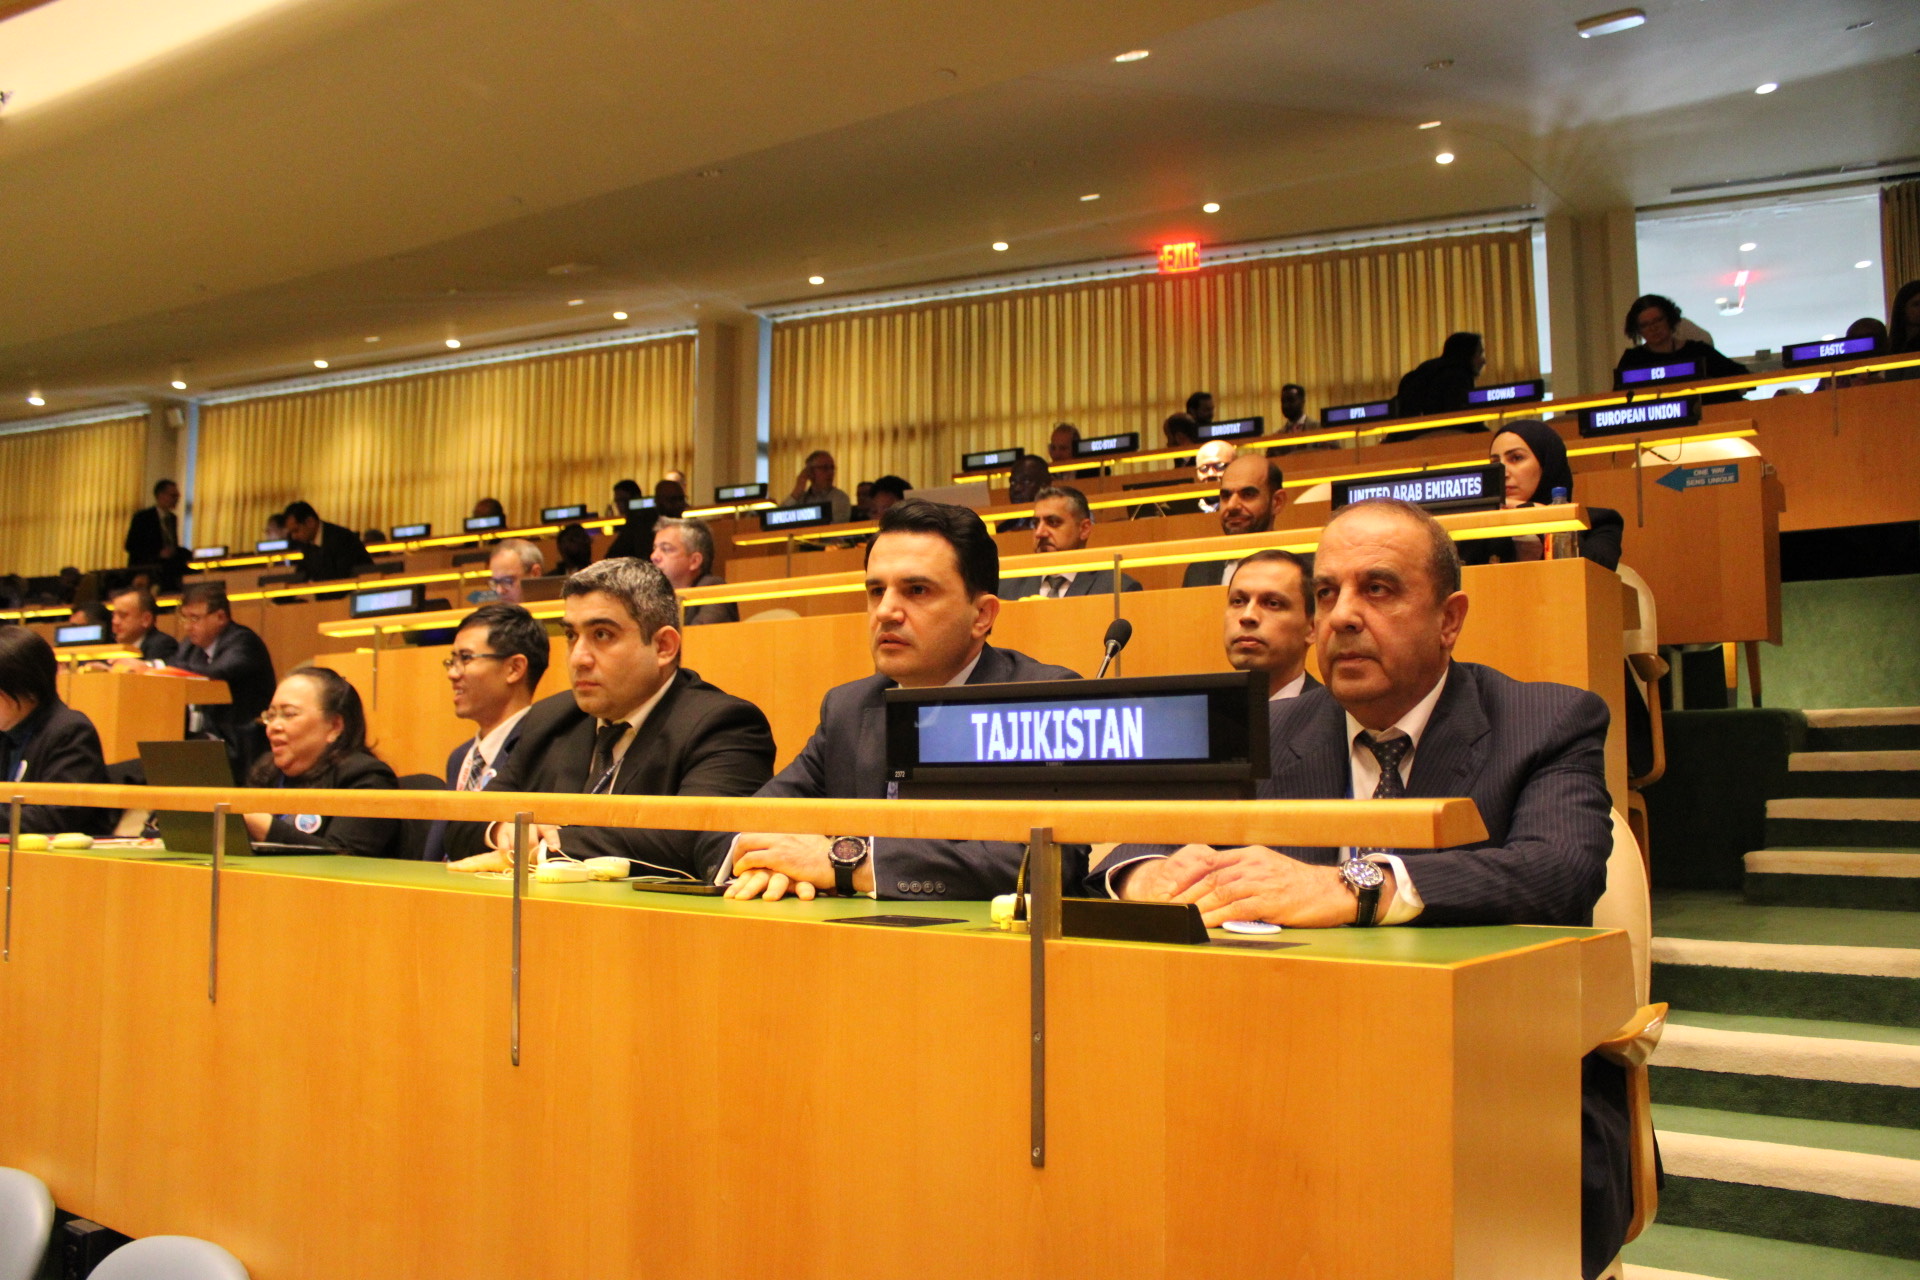 PARTICIPATION OF THE DELEGATION OF THE REPUBLIC OF TAJIKISTAN IN THE 55TH UN STATISTICAL COMMISSION